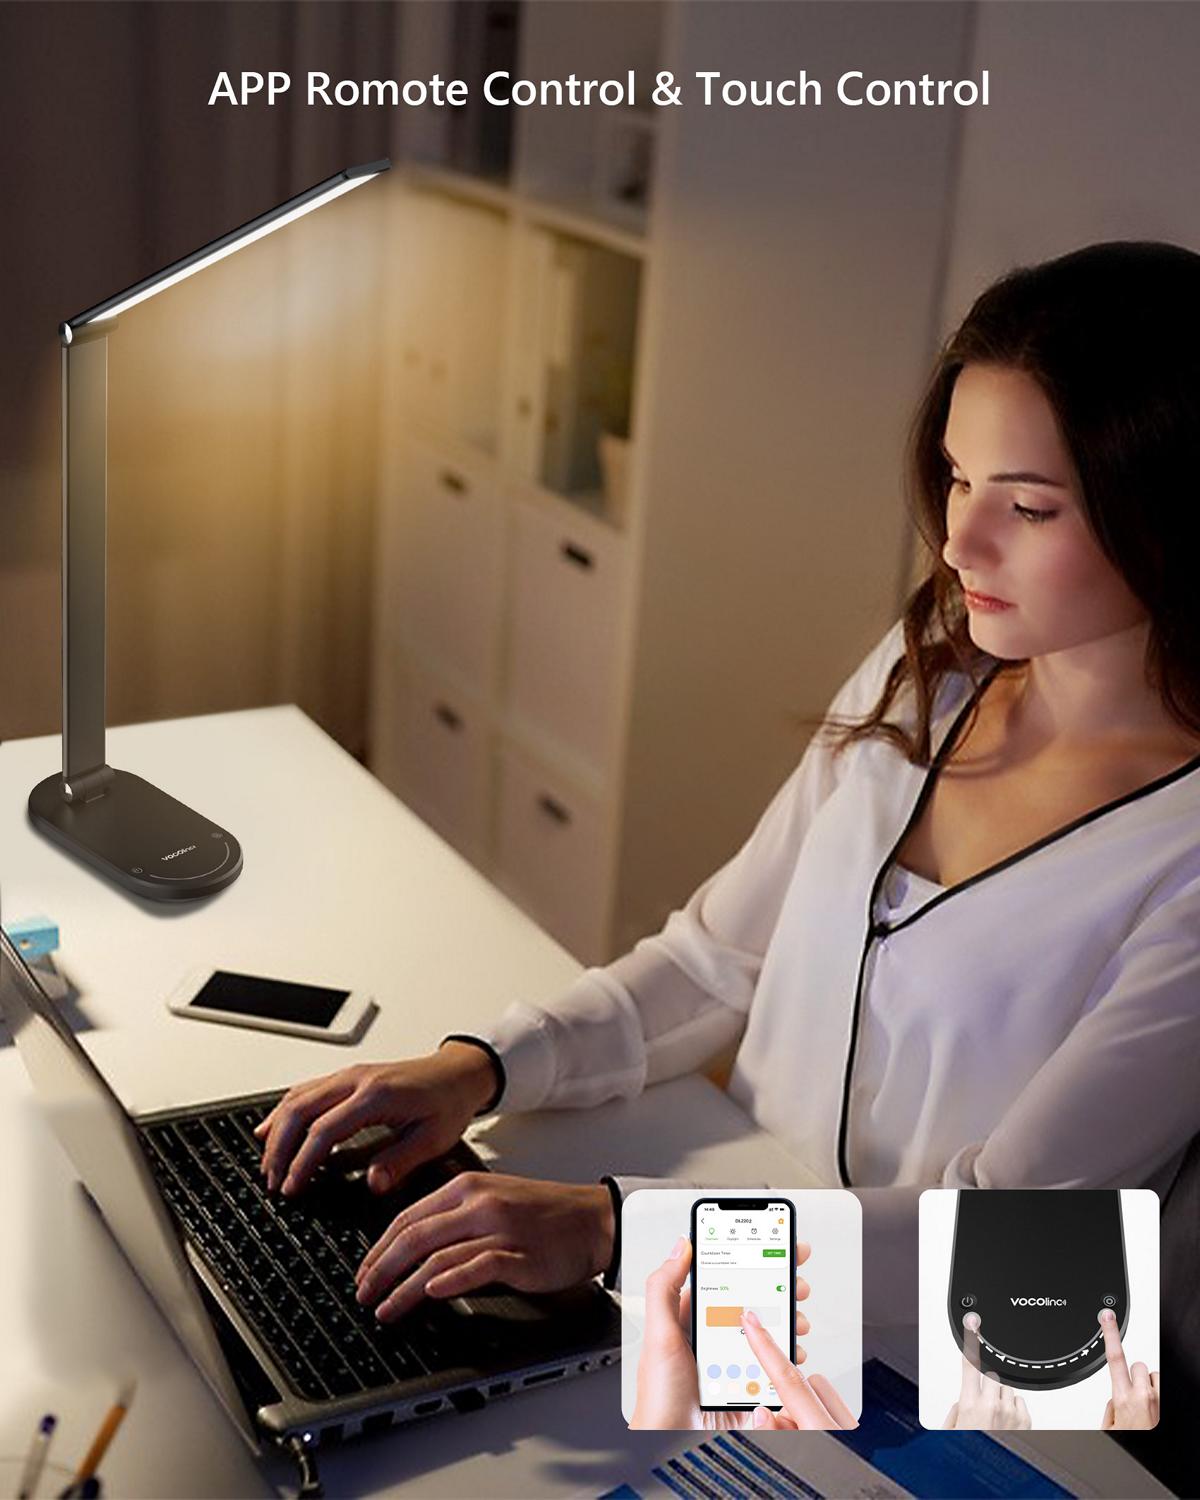 Remote Control: You could remotely control a led desk lamp from anywhere via the VOCOlinc app, very convenient and safe. A touch sensor switch is applied to this table lamp. Just click on the control panel to adjust brightness and color temperature, and t